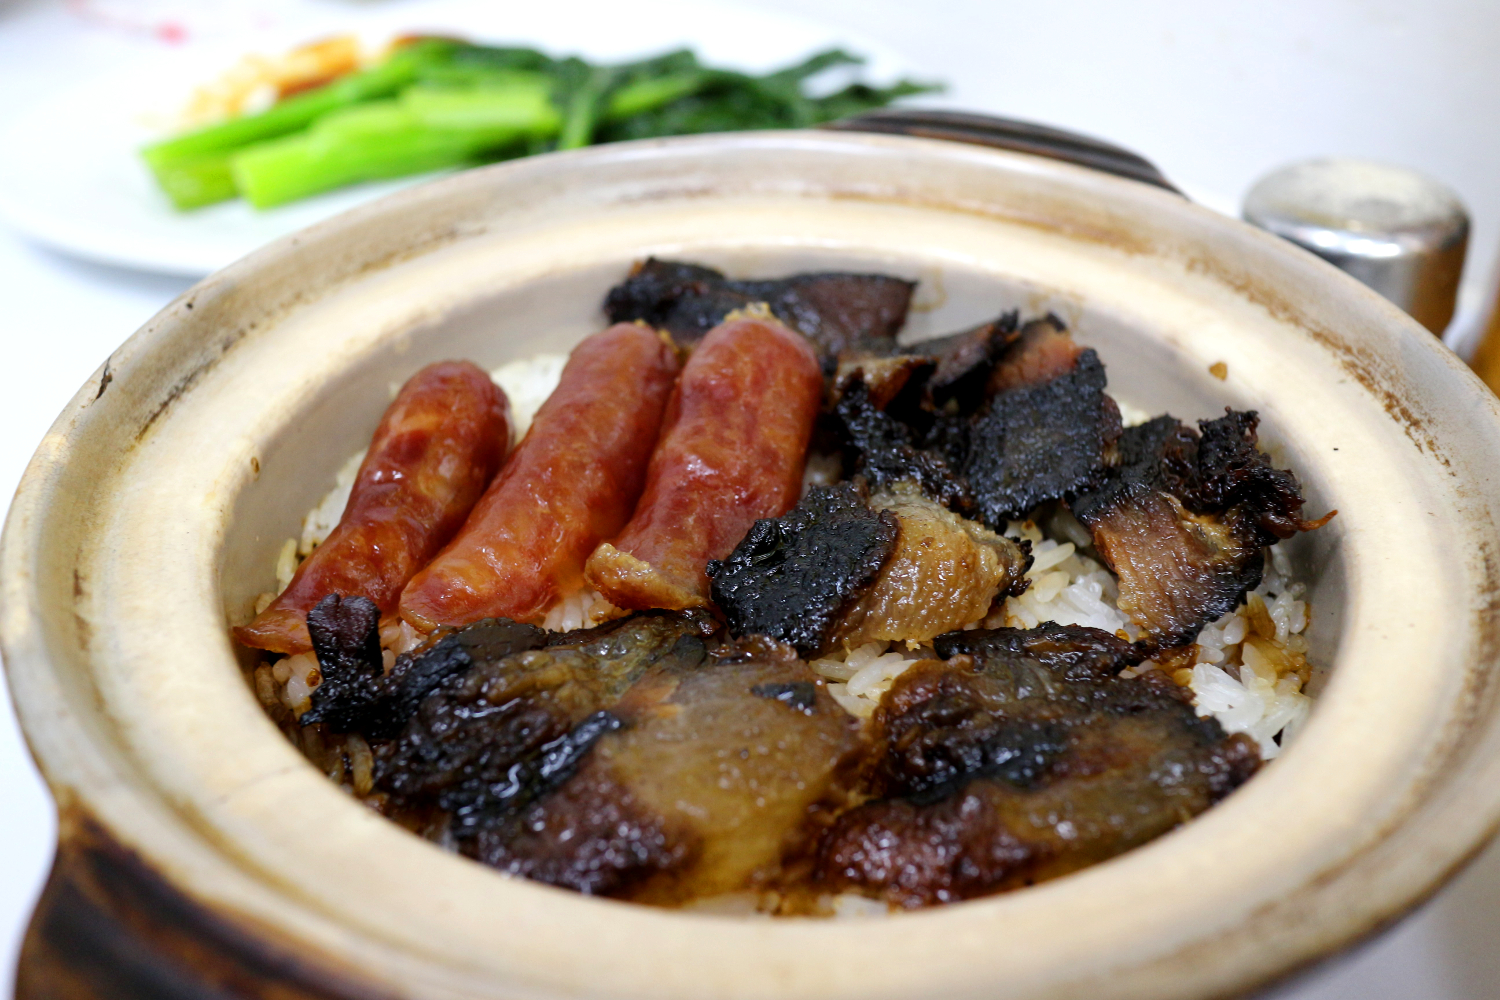 Claypot rice with Chinese sausages and cured pork. Image by Piera Chen / londoninfopage